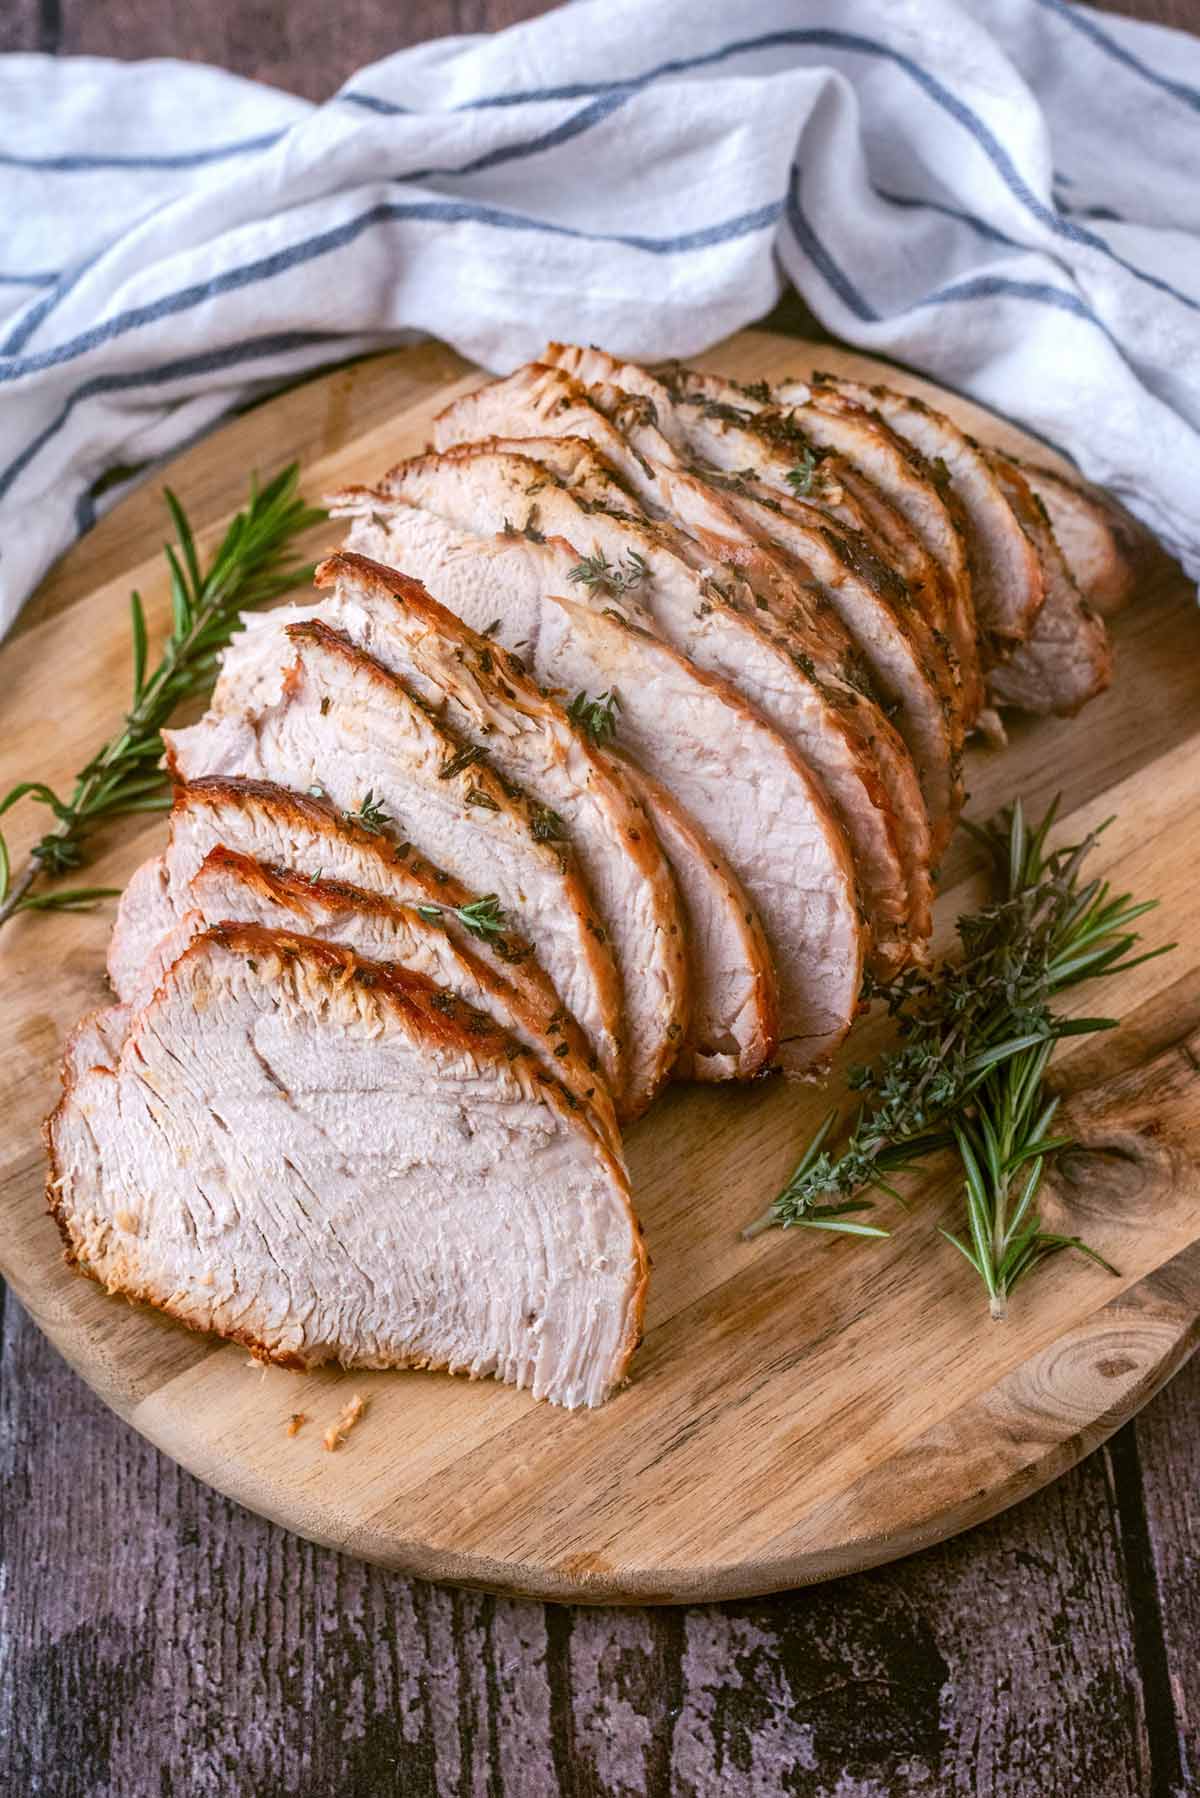 Sliced cooked turkey on a wooden serving board in front of a striped towel.